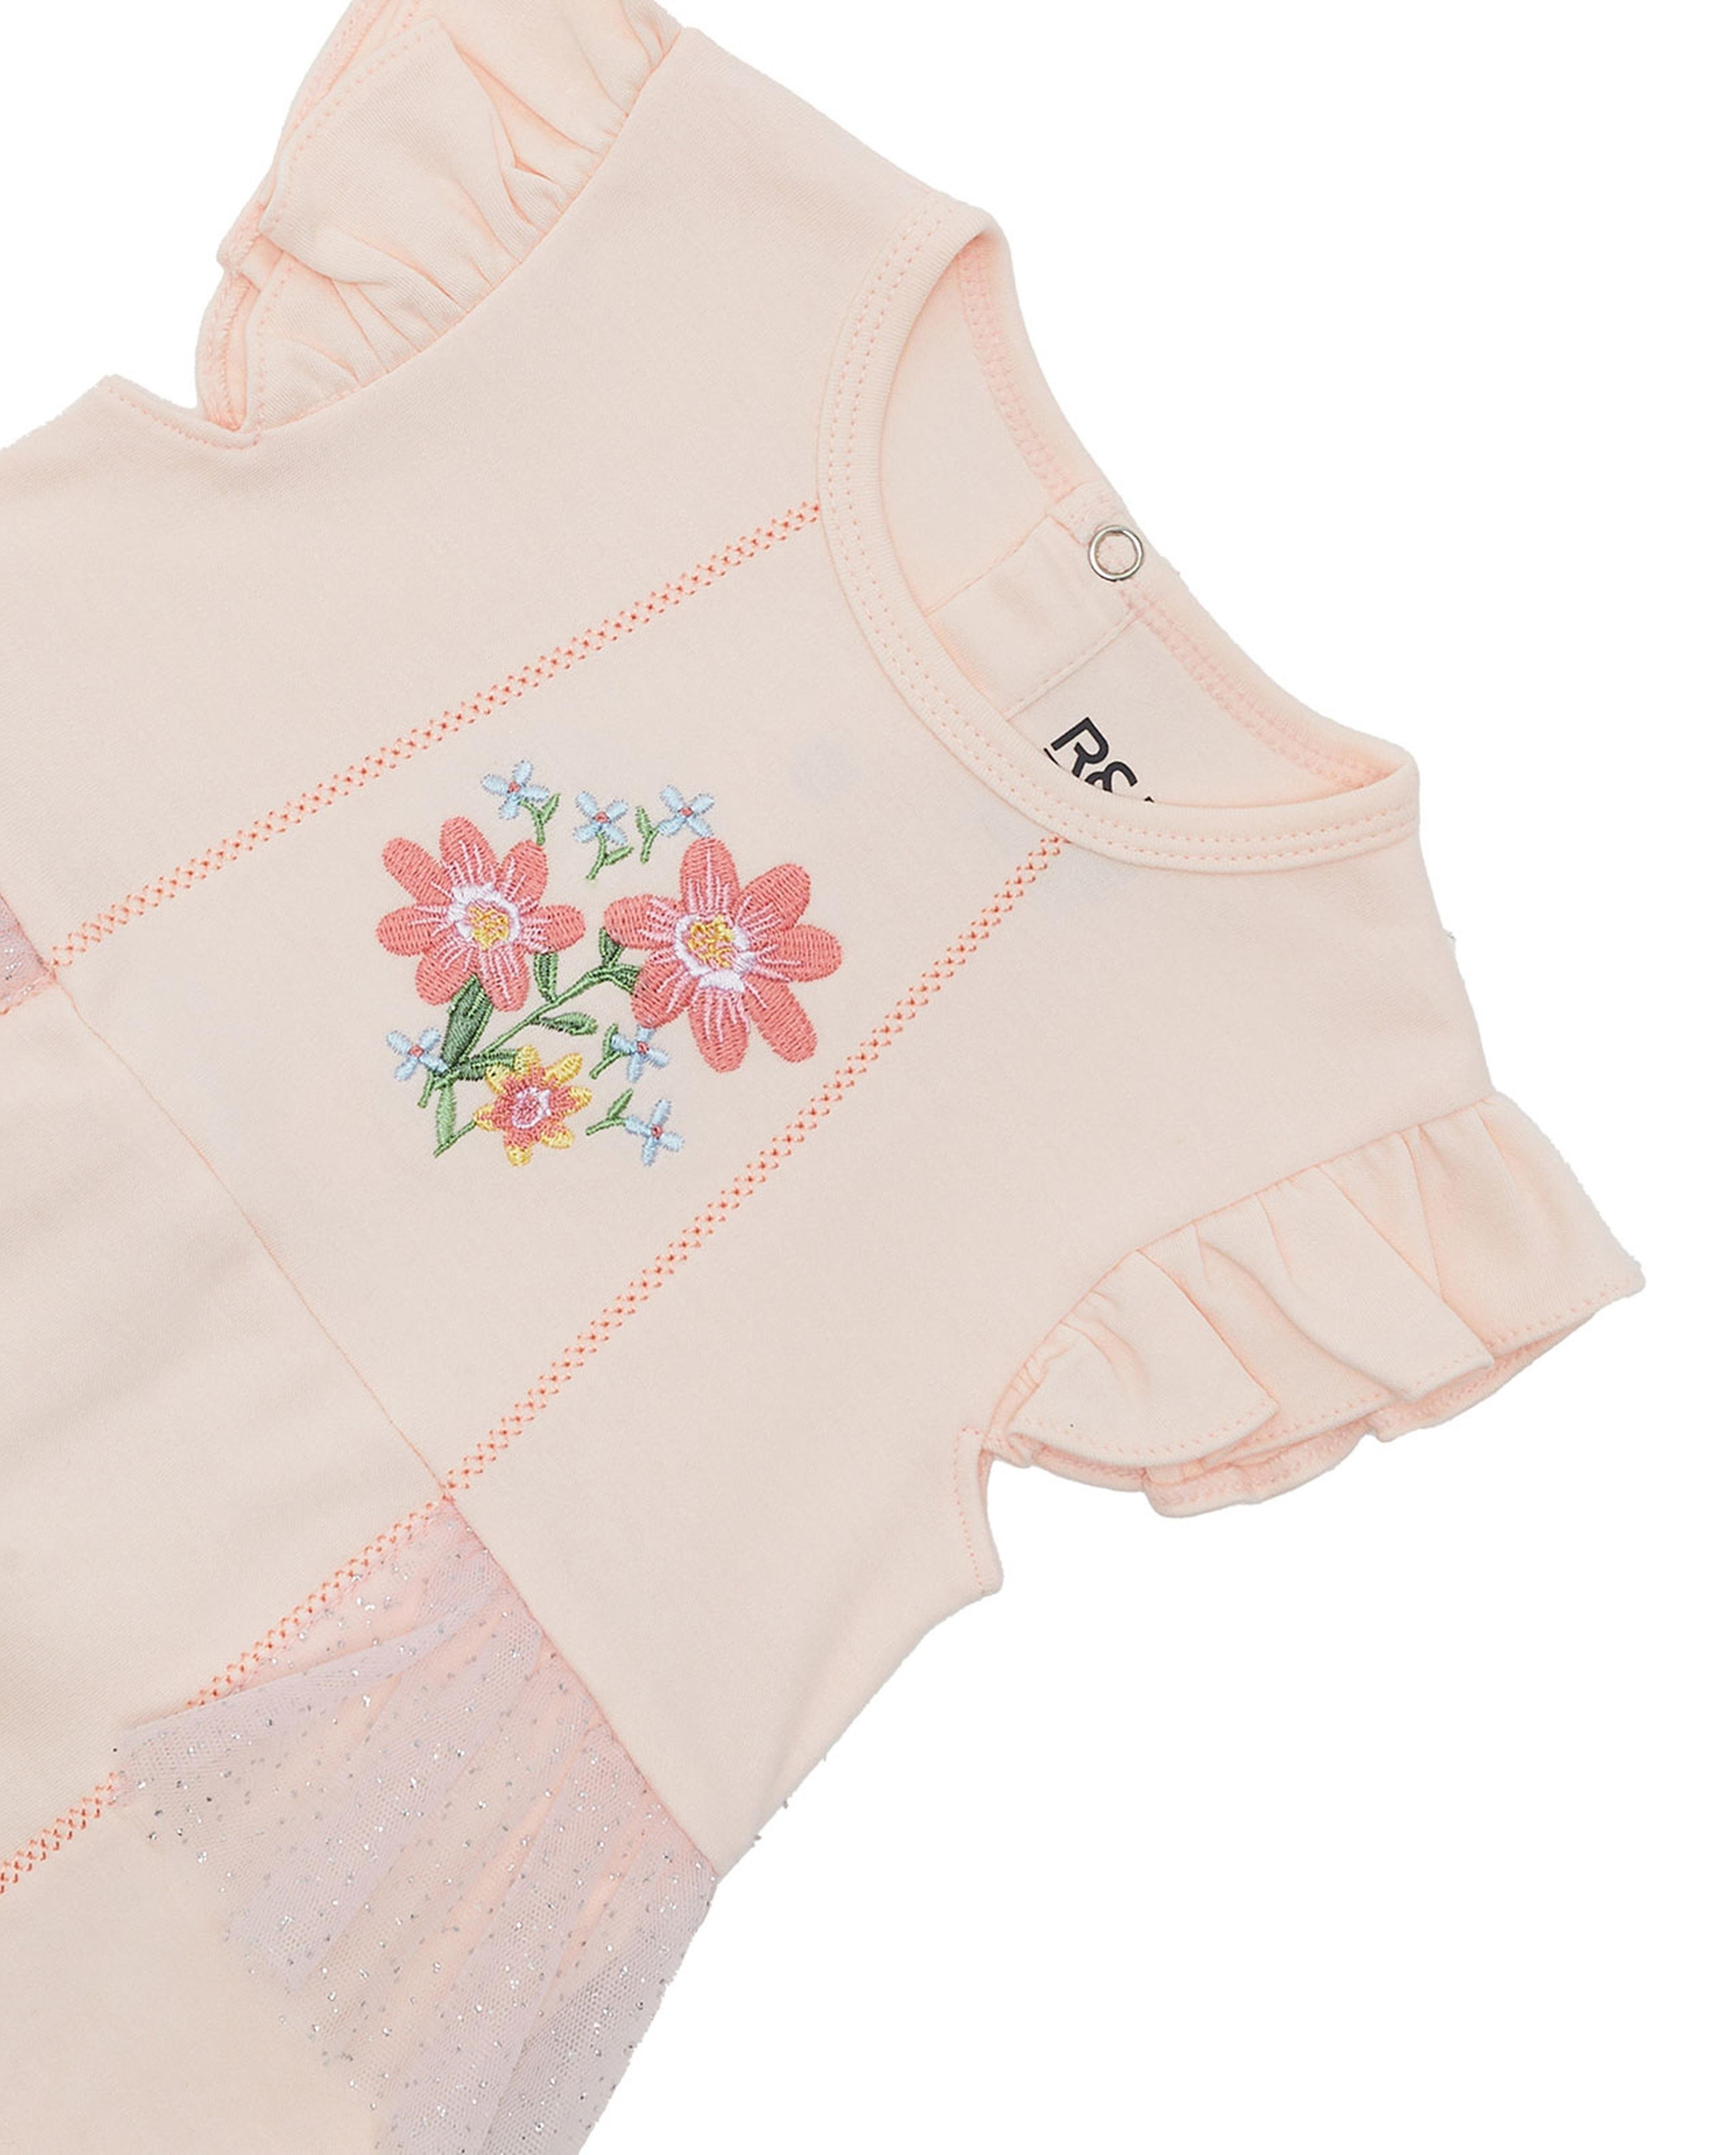 Embroidery Detail Rompers with Crew Neck and Flutter Sleeves